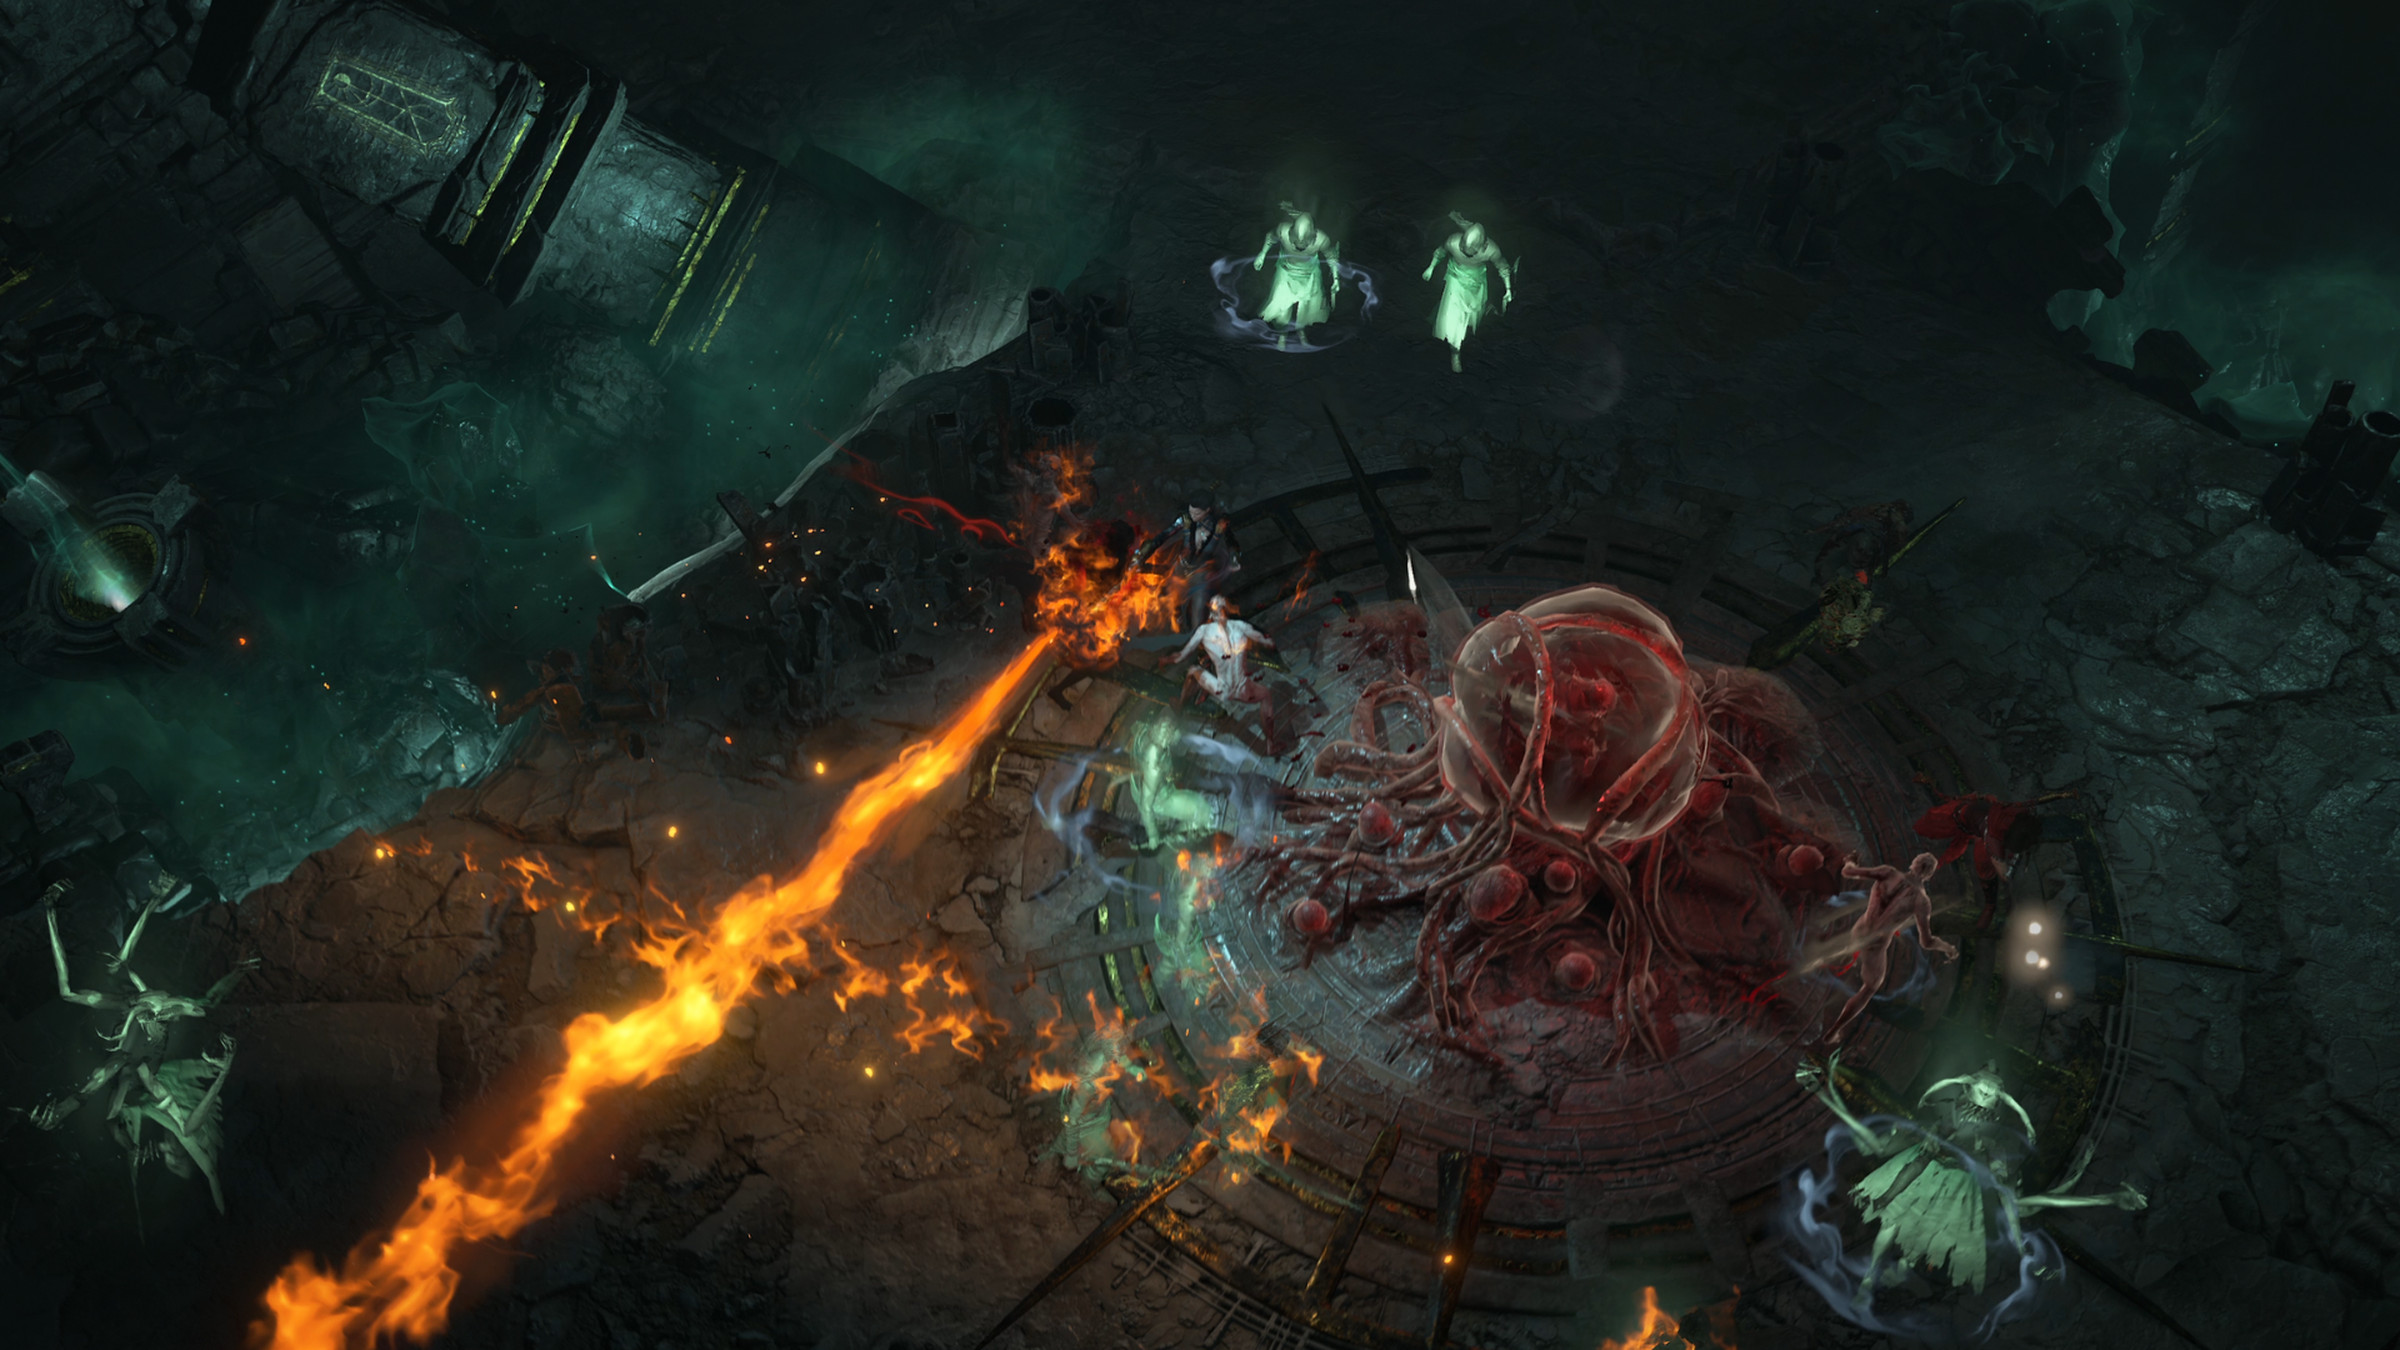 Screenshot from Diablo IV featuring a top-down view of a dark dungeon with a bubbling flesh monster, spectral enemies, and a tongue of fire emanating from a monster.